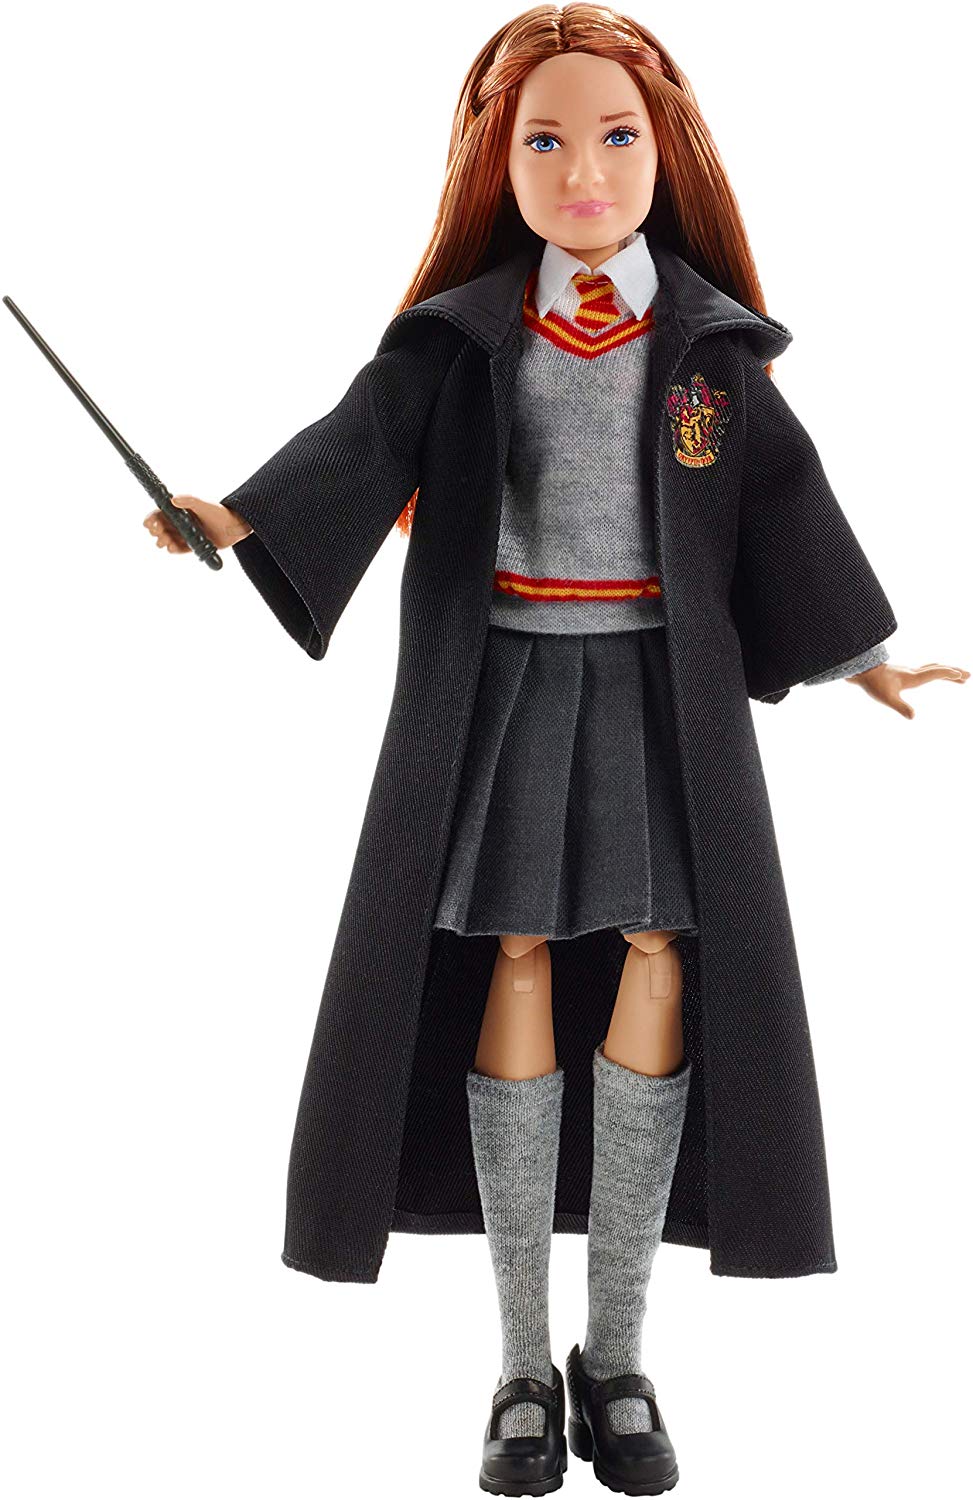 Mattel Harry Potter And The Chamber Of Secrets Ginny Weasley Gmbh Fym53 Dol